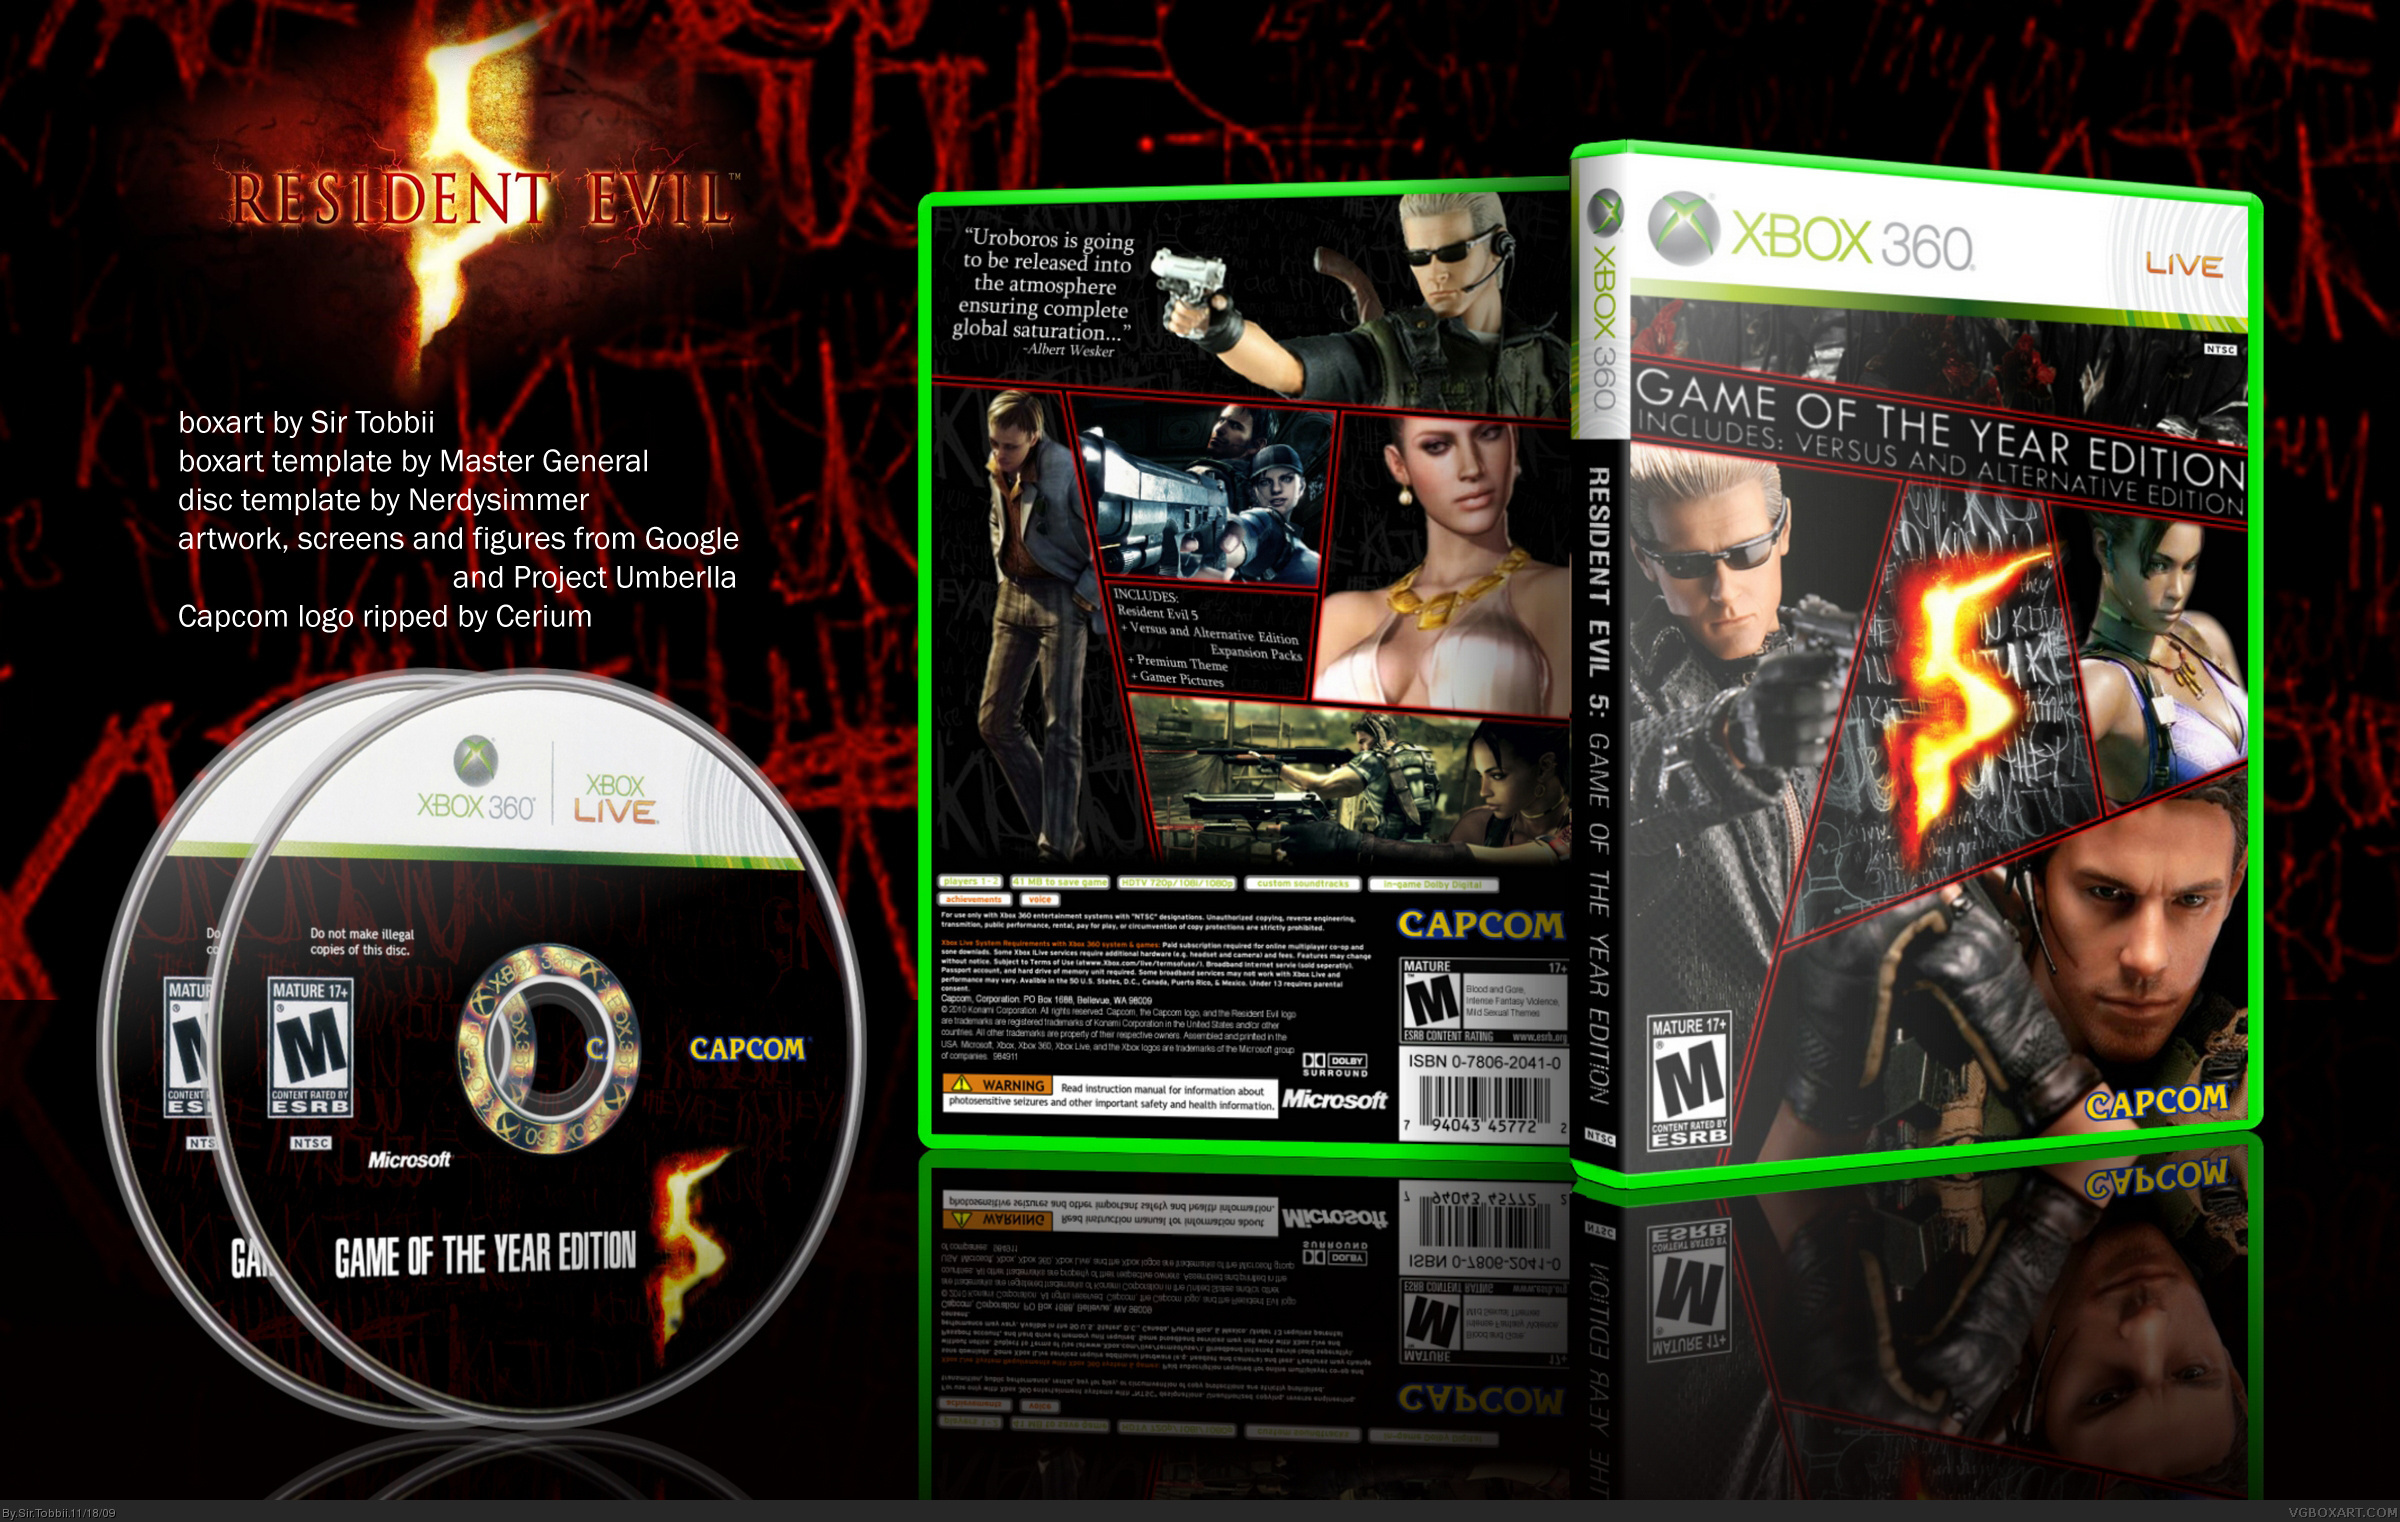 Resident Evil 5: Game of the Year Edition box cover